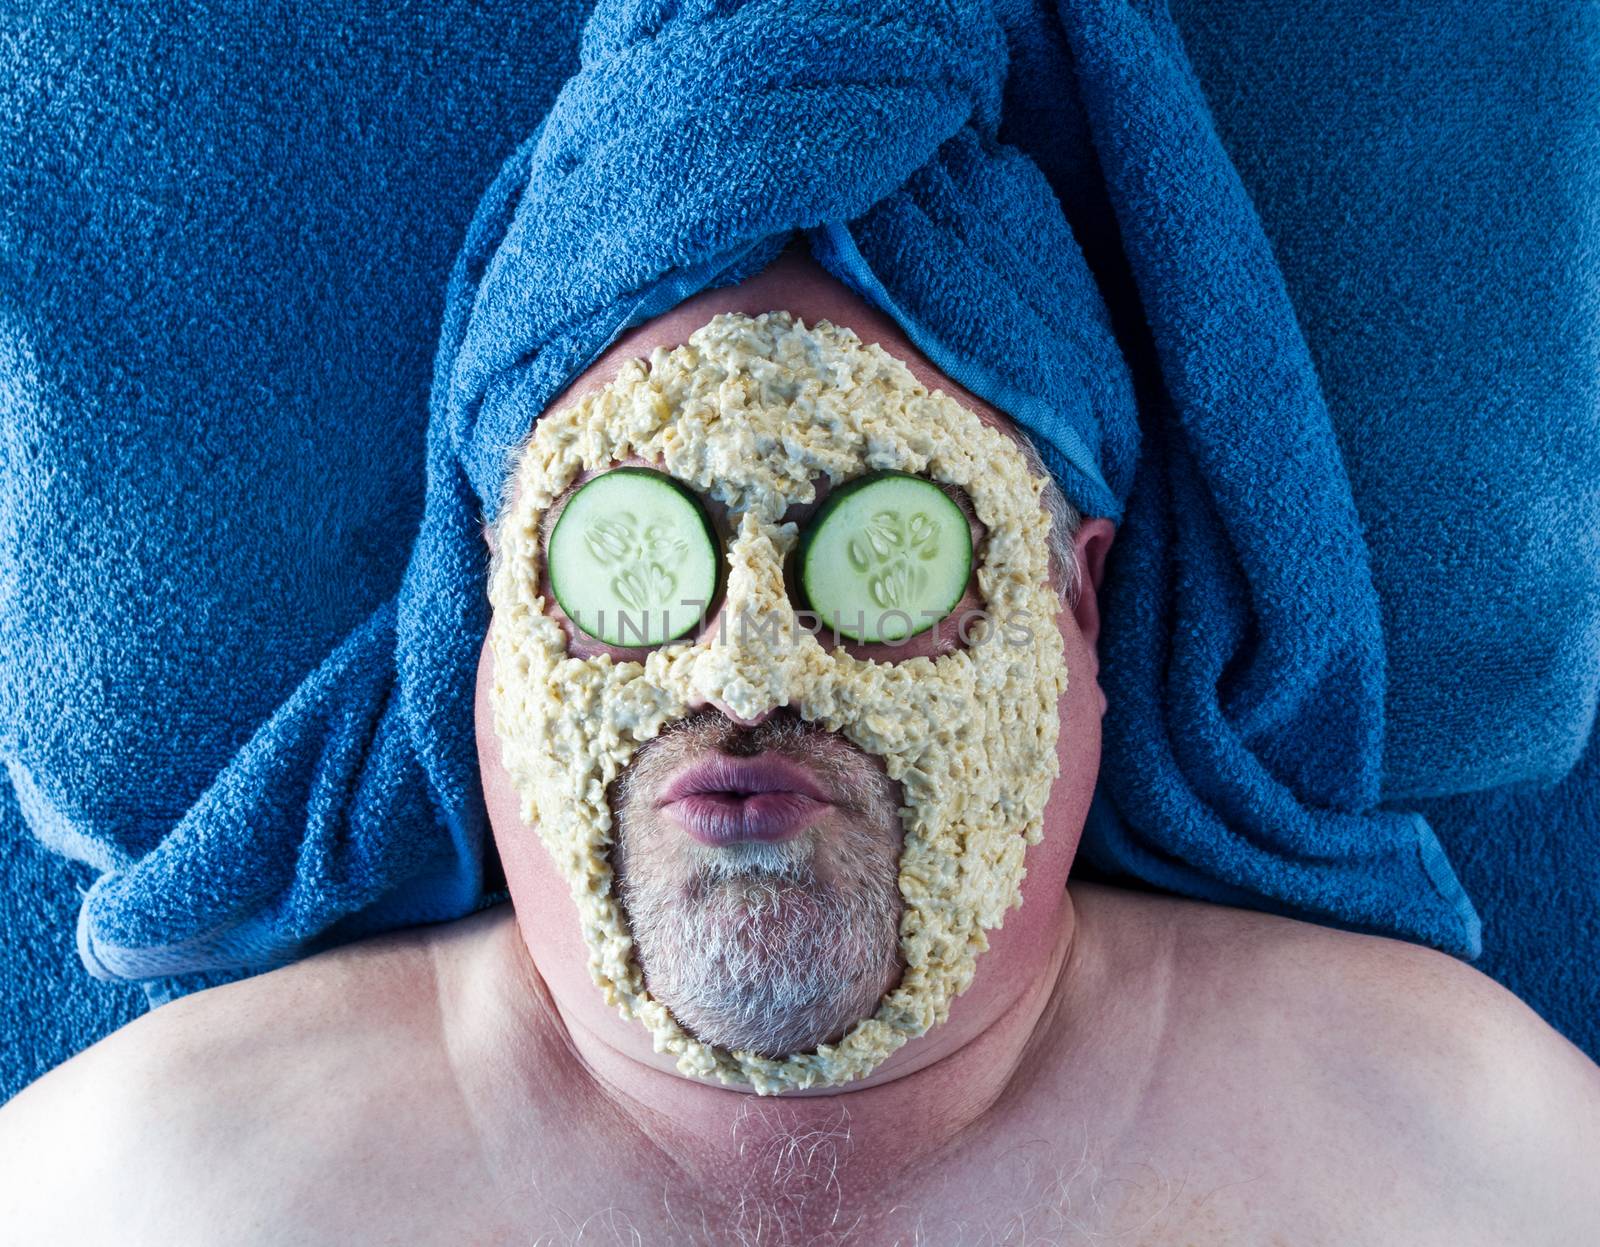 Man Getting Facial With Silly Facial Expression by krisblackphotography